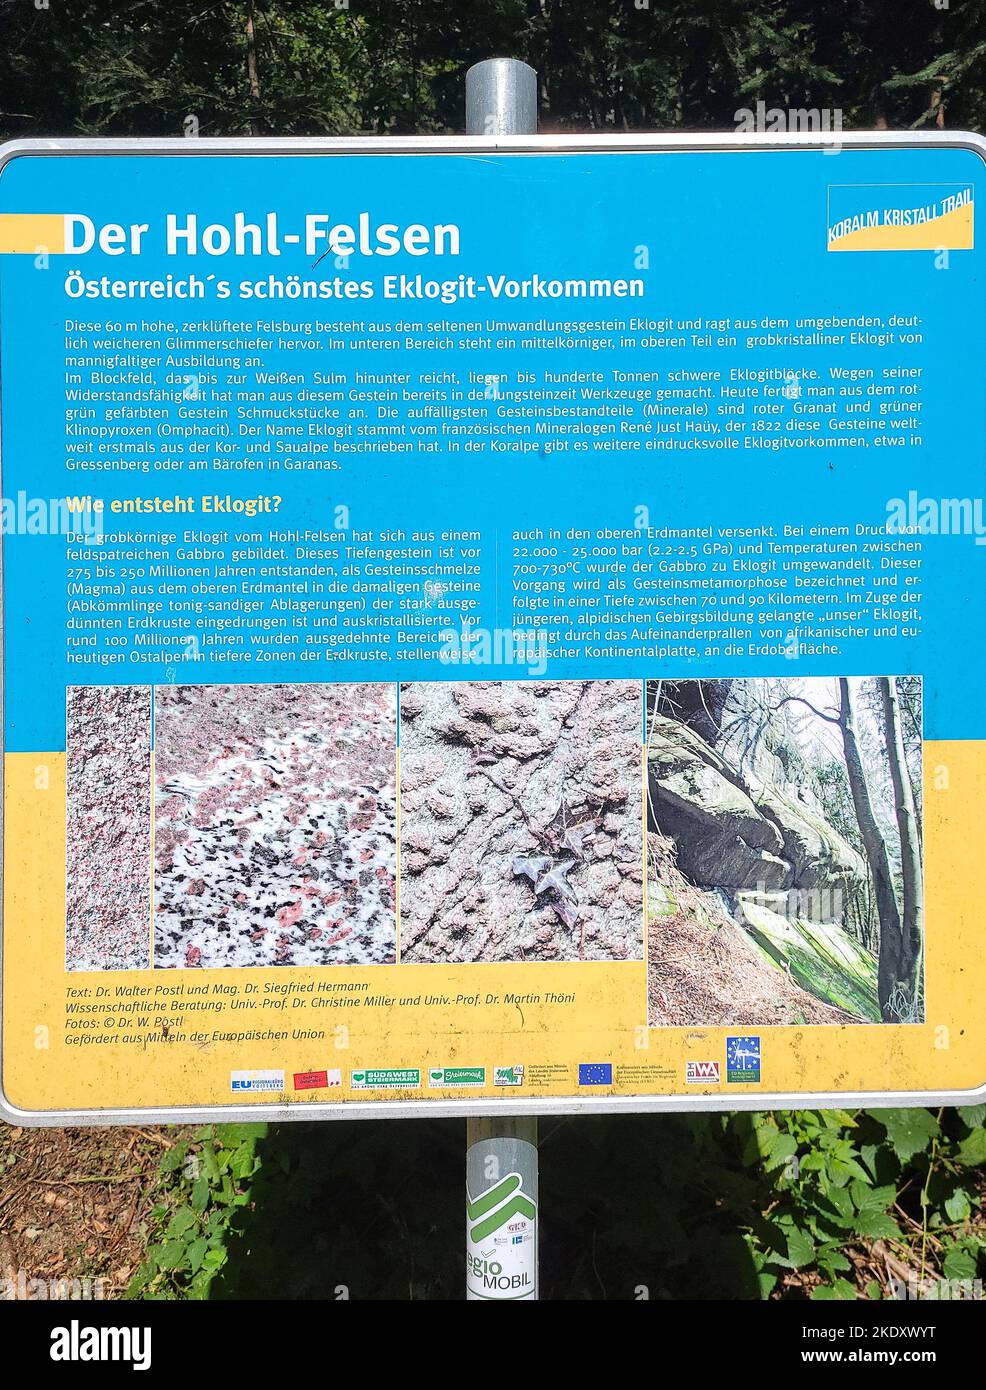 Austria, description and information about natural wonder the so-called Hohl-Felsen - Hollow Rock - with eclogite rock, a particularly resistant mater Stock Photo